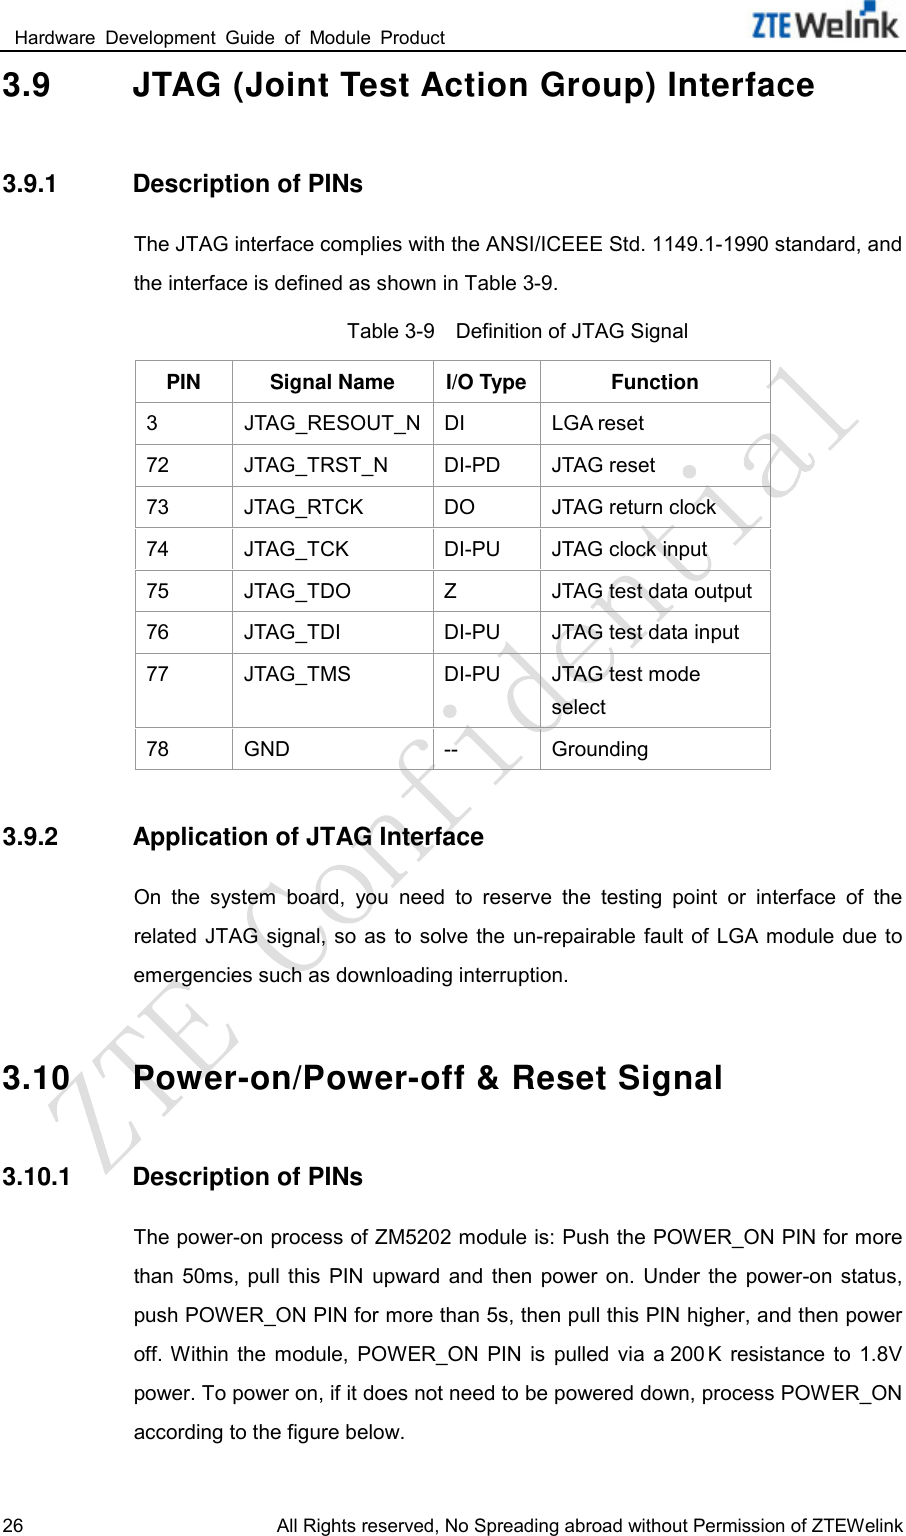  Hardware  Development  Guide  of  Module  Product                                                               26 All Rights reserved, No Spreading abroad without Permission of ZTEWelink 3.9 JTAG (Joint Test Action Group) Interface 3.9.1 Description of PINs The JTAG interface complies with the ANSI/ICEEE Std. 1149.1-1990 standard, and the interface is defined as shown in Table 3-9.   Table 3-9    Definition of JTAG Signal PIN Signal Name I/O Type Function 3  JTAG_RESOUT_N DI LGA reset 72 JTAG_TRST_N DI-PD JTAG reset 73 JTAG_RTCK DO JTAG return clock 74 JTAG_TCK DI-PU JTAG clock input 75 JTAG_TDO  Z  JTAG test data output 76 JTAG_TDI DI-PU JTAG test data input 77 JTAG_TMS DI-PU JTAG test mode select 78 GND -- Grounding 3.9.2 Application of JTAG Interface On  the  system  board,  you  need  to  reserve  the  testing  point  or  interface  of  the related  JTAG signal,  so  as  to solve  the un-repairable  fault of LGA module  due  to emergencies such as downloading interruption.   3.10 Power-on/Power-off &amp; Reset Signal 3.10.1 Description of PINs The power-on process of ZM5202 module is: Push the POWER_ON PIN for more than  50ms,  pull  this  PIN  upward  and  then  power  on.  Under  the  power-on  status, push POWER_ON PIN for more than 5s, then pull this PIN higher, and then power off. Within  the  module,  POWER_ON  PIN  is  pulled  via  a 200 K  resistance  to  1.8V power. To power on, if it does not need to be powered down, process POWER_ON according to the figure below.   